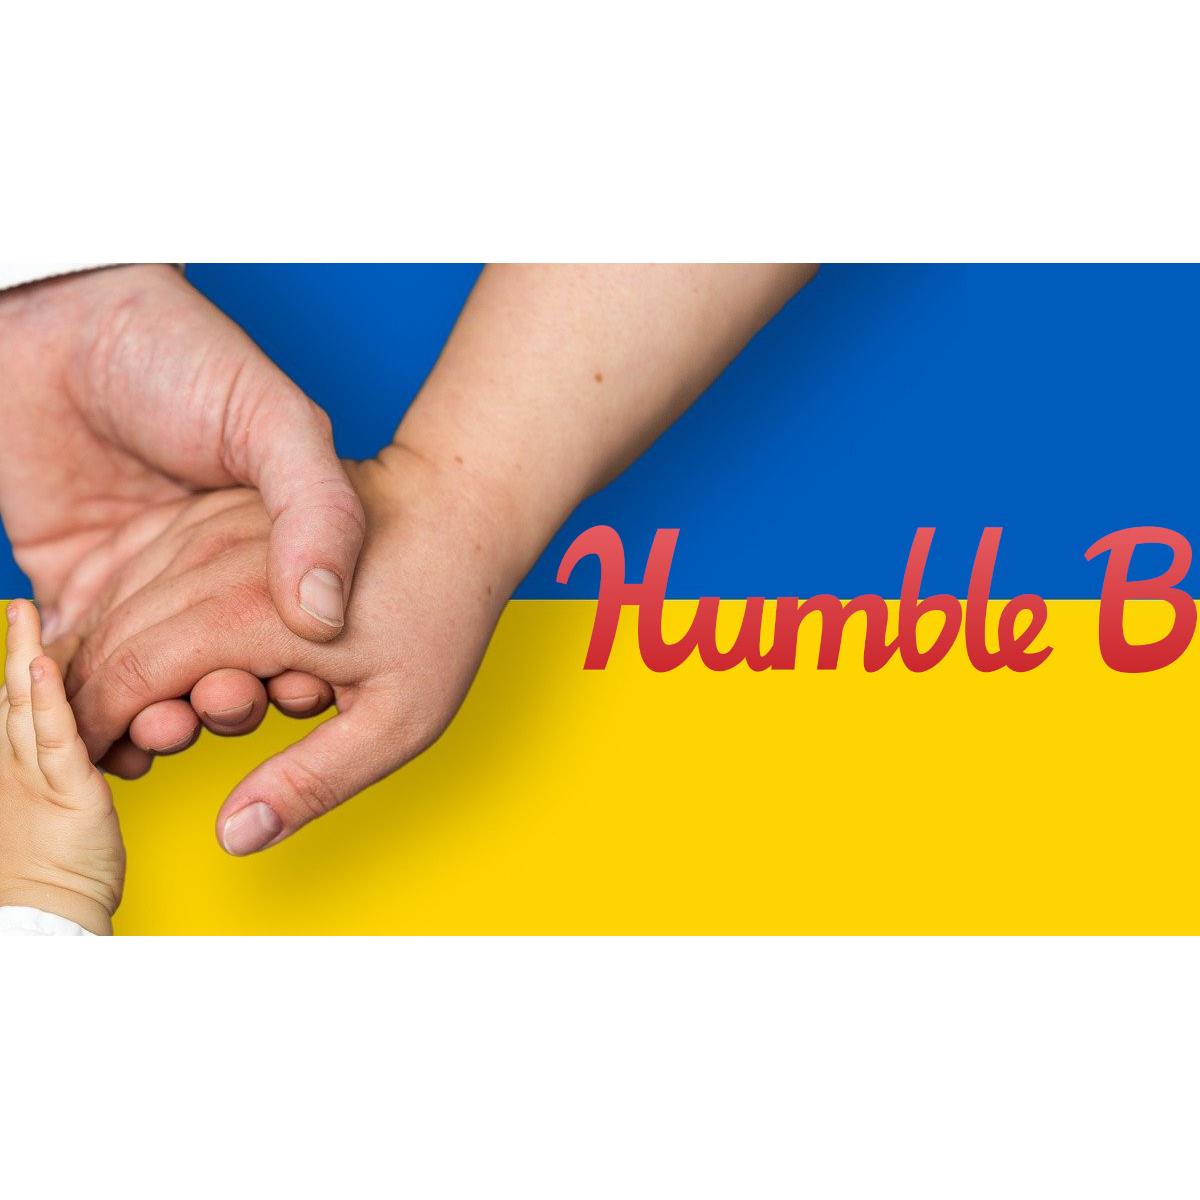 Humble Ukraine Bundle offers Back 4 Blood and more